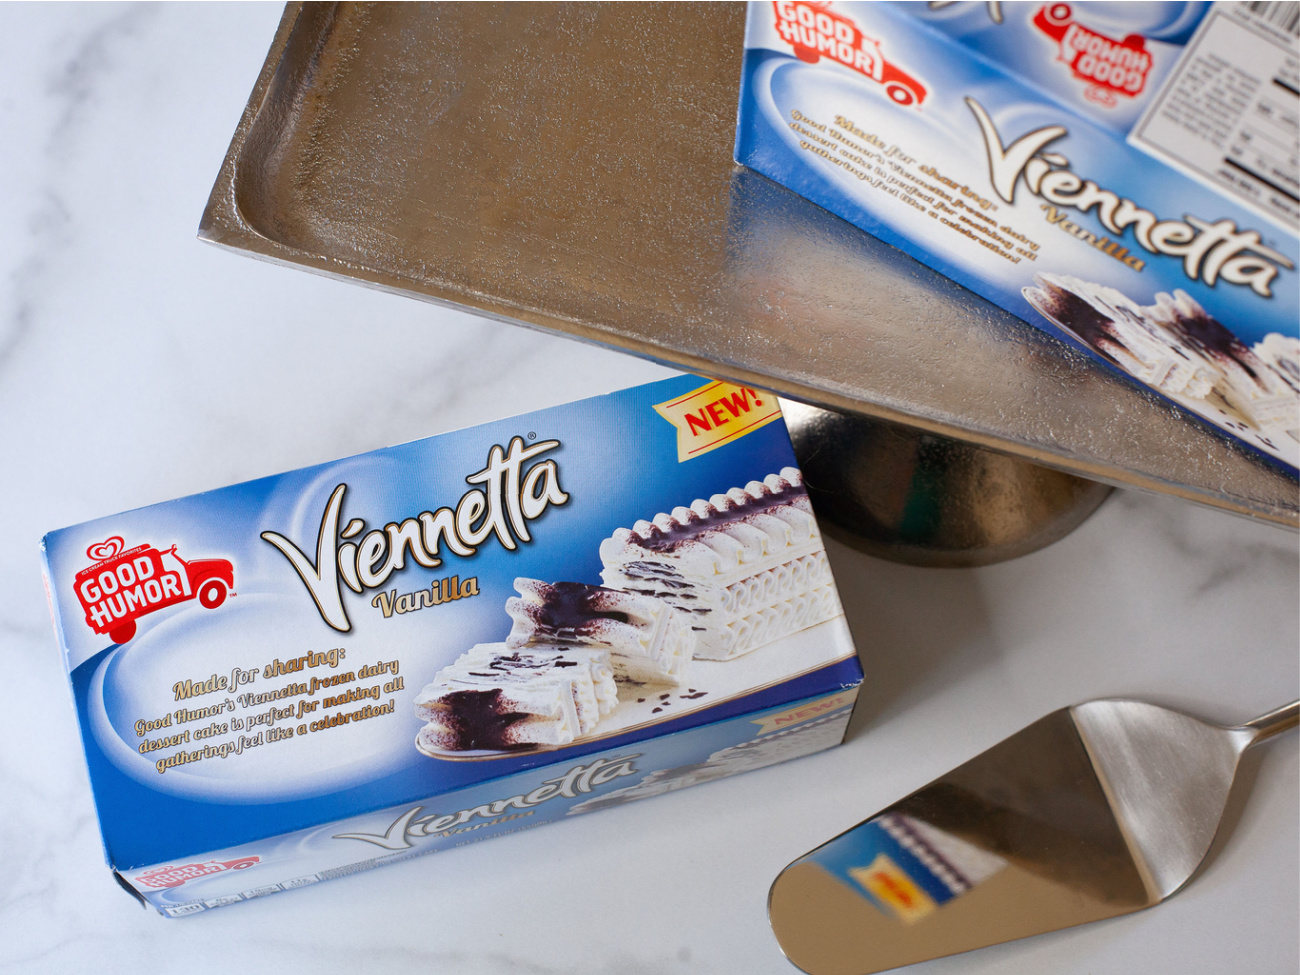 Good Humor Viennetta Cake Is A Delicious Dessert Your Whole Family Will Love - Save At Publix! on I Heart Publix 3